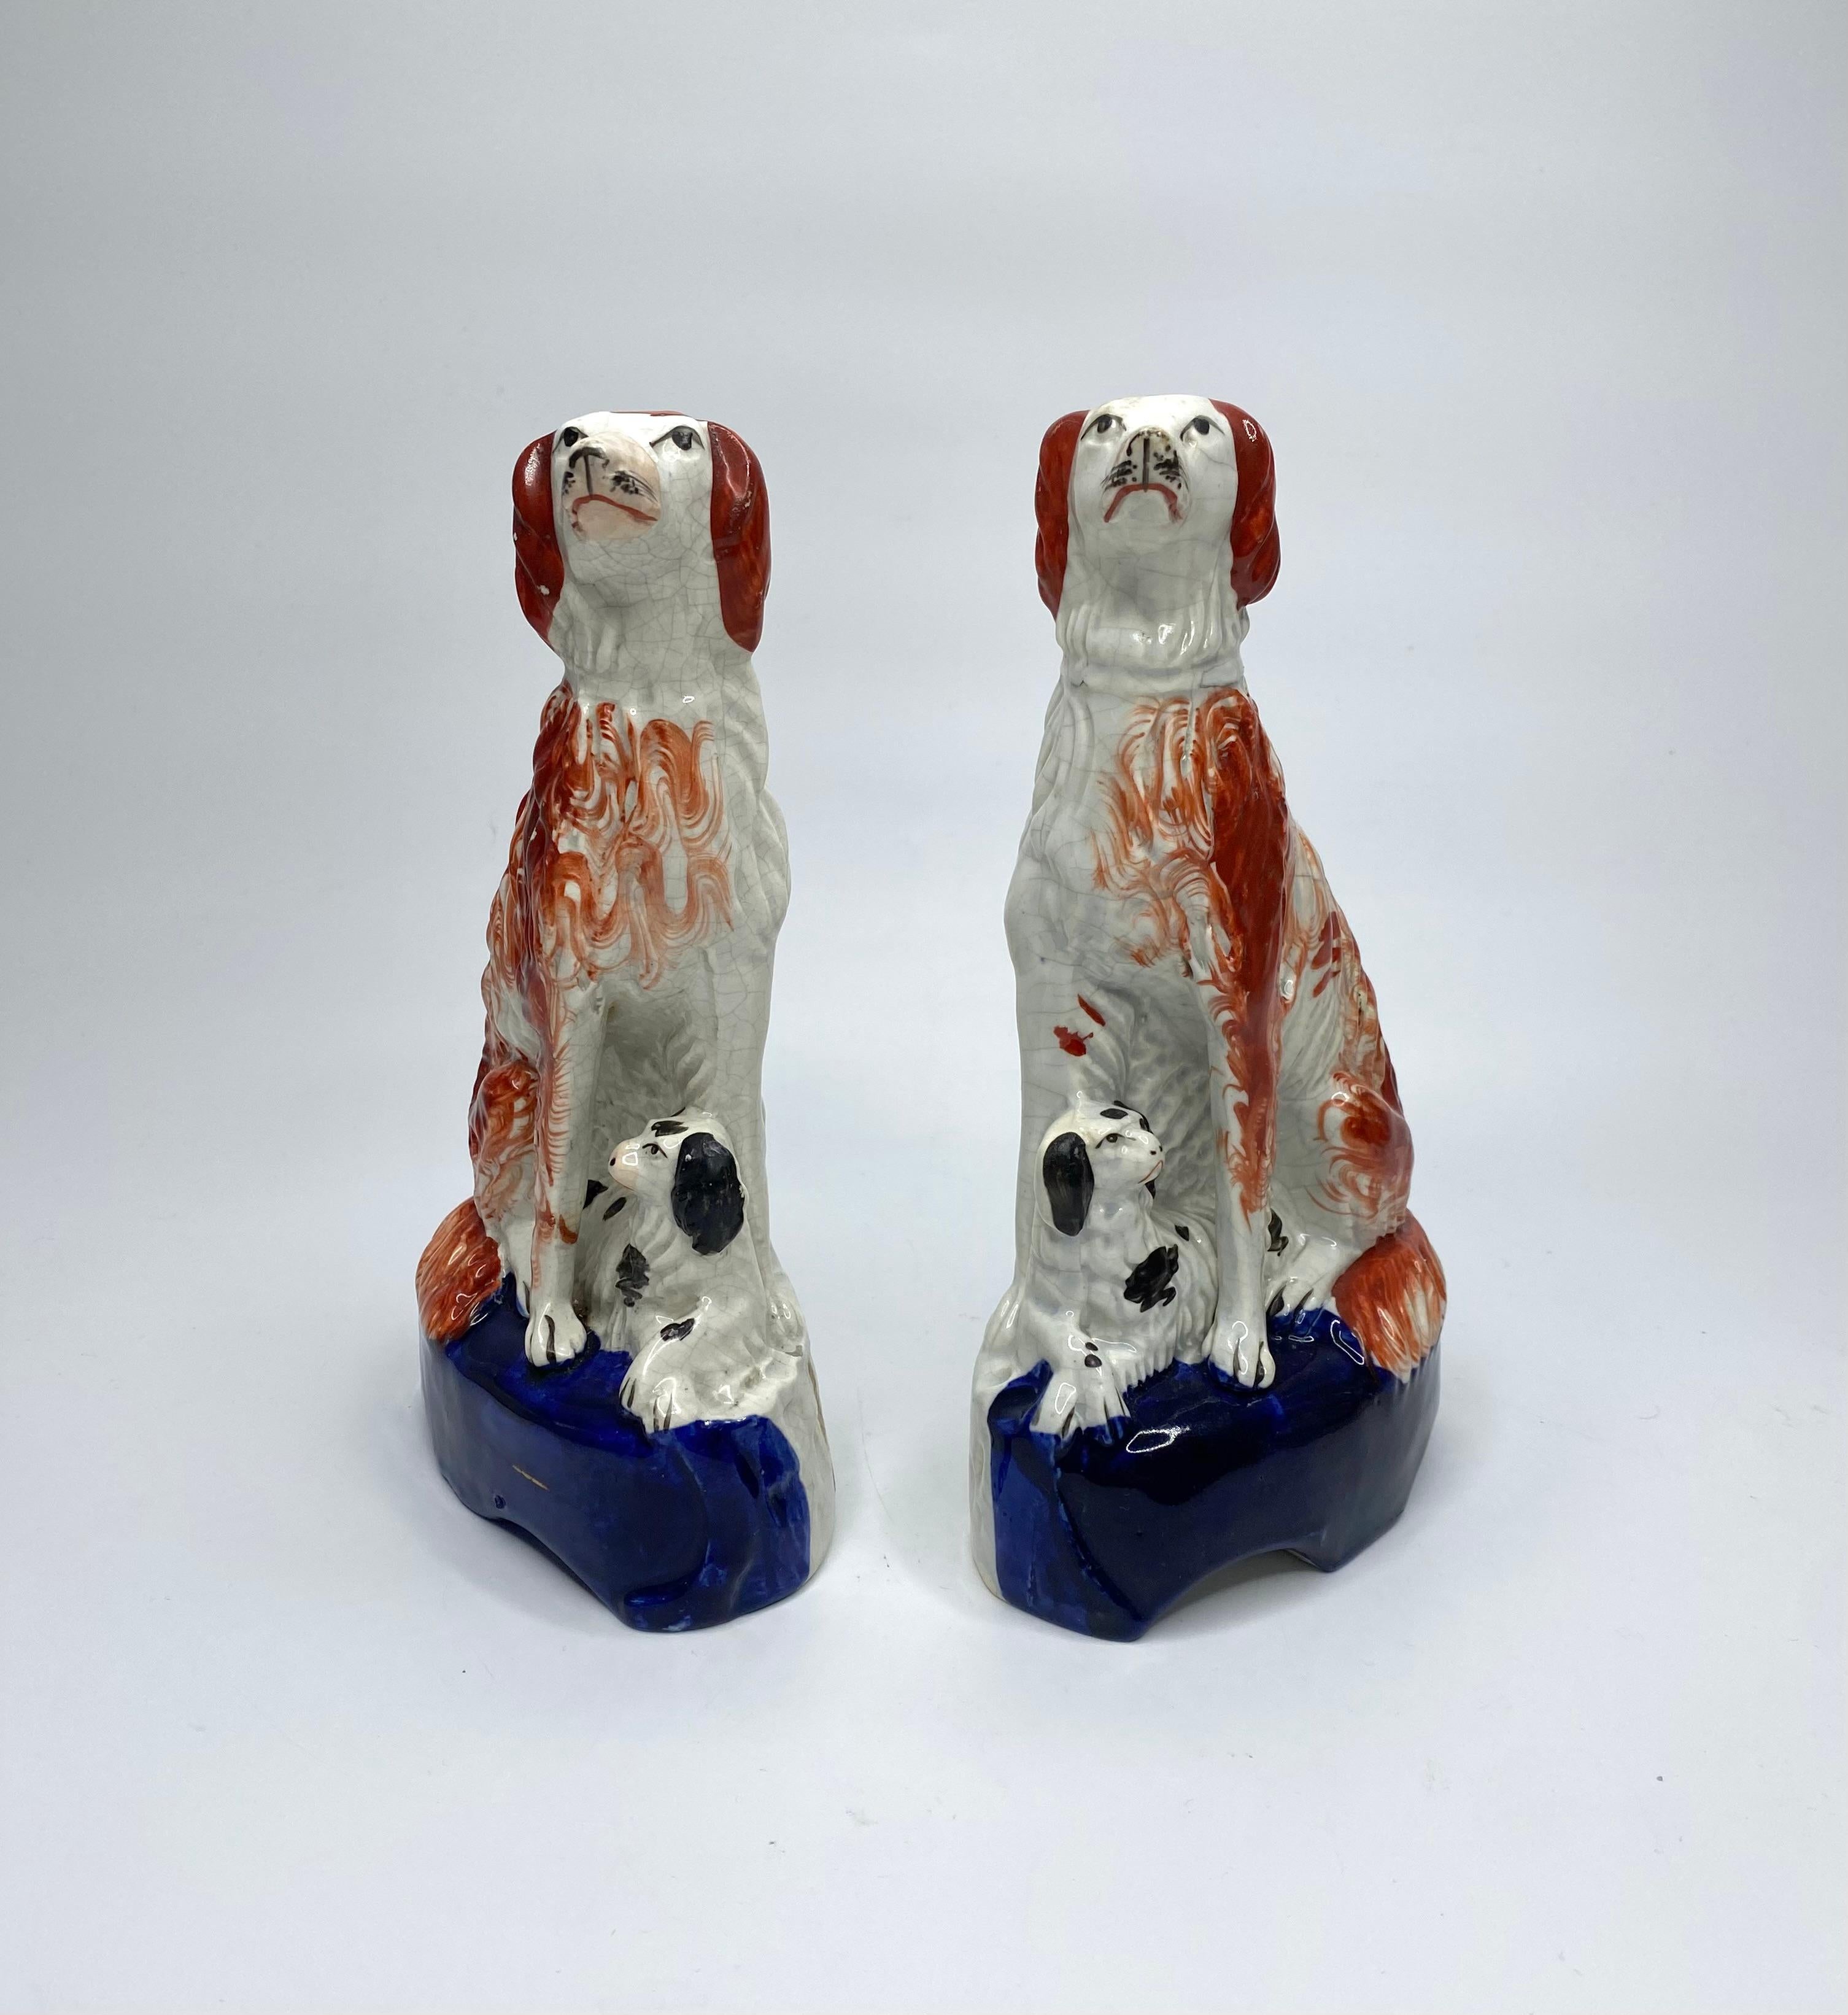 English Staffordshire pottery Irish Setters, and puppies, c. 1850. For Sale